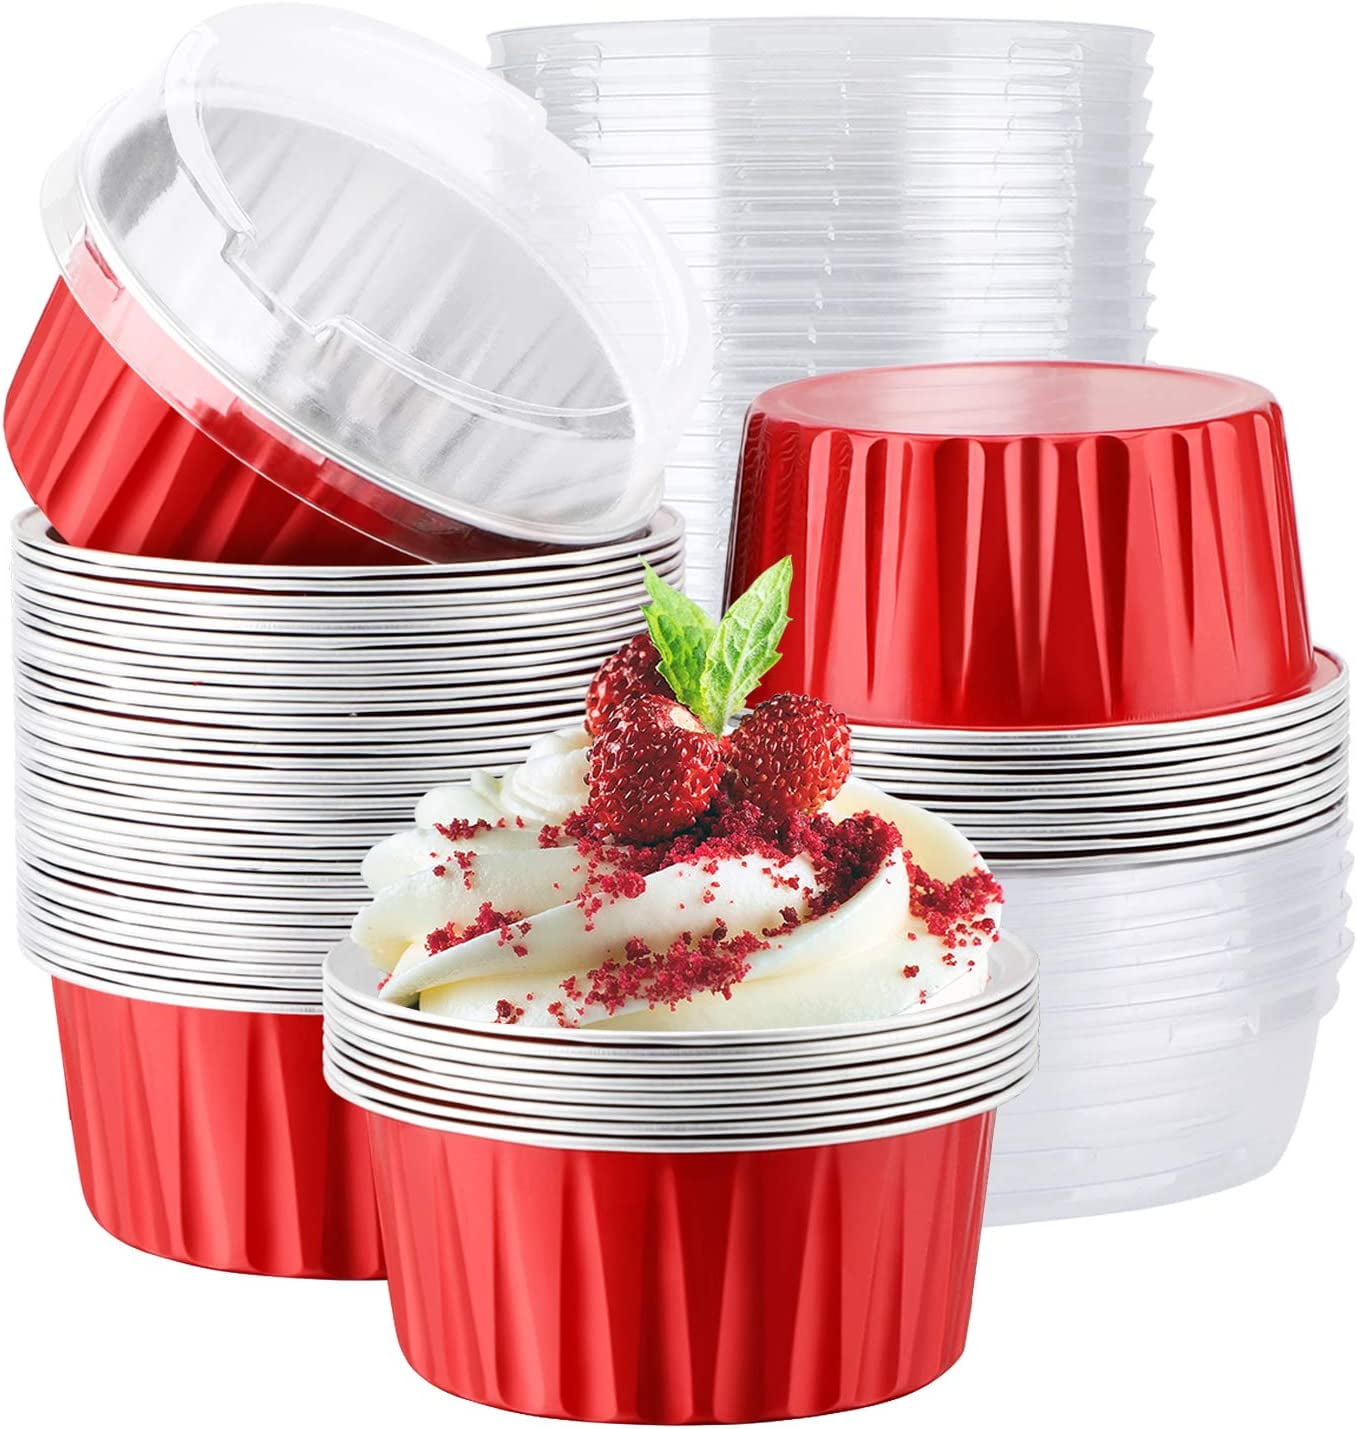 50Pcs Aluminum Foil Baking Cups with Lids, Blue, 5oz 125ml Ramekin Cupcake  Liners Muffin Liners Mini Pie Pans Foil Cupcake Containers for Christmas